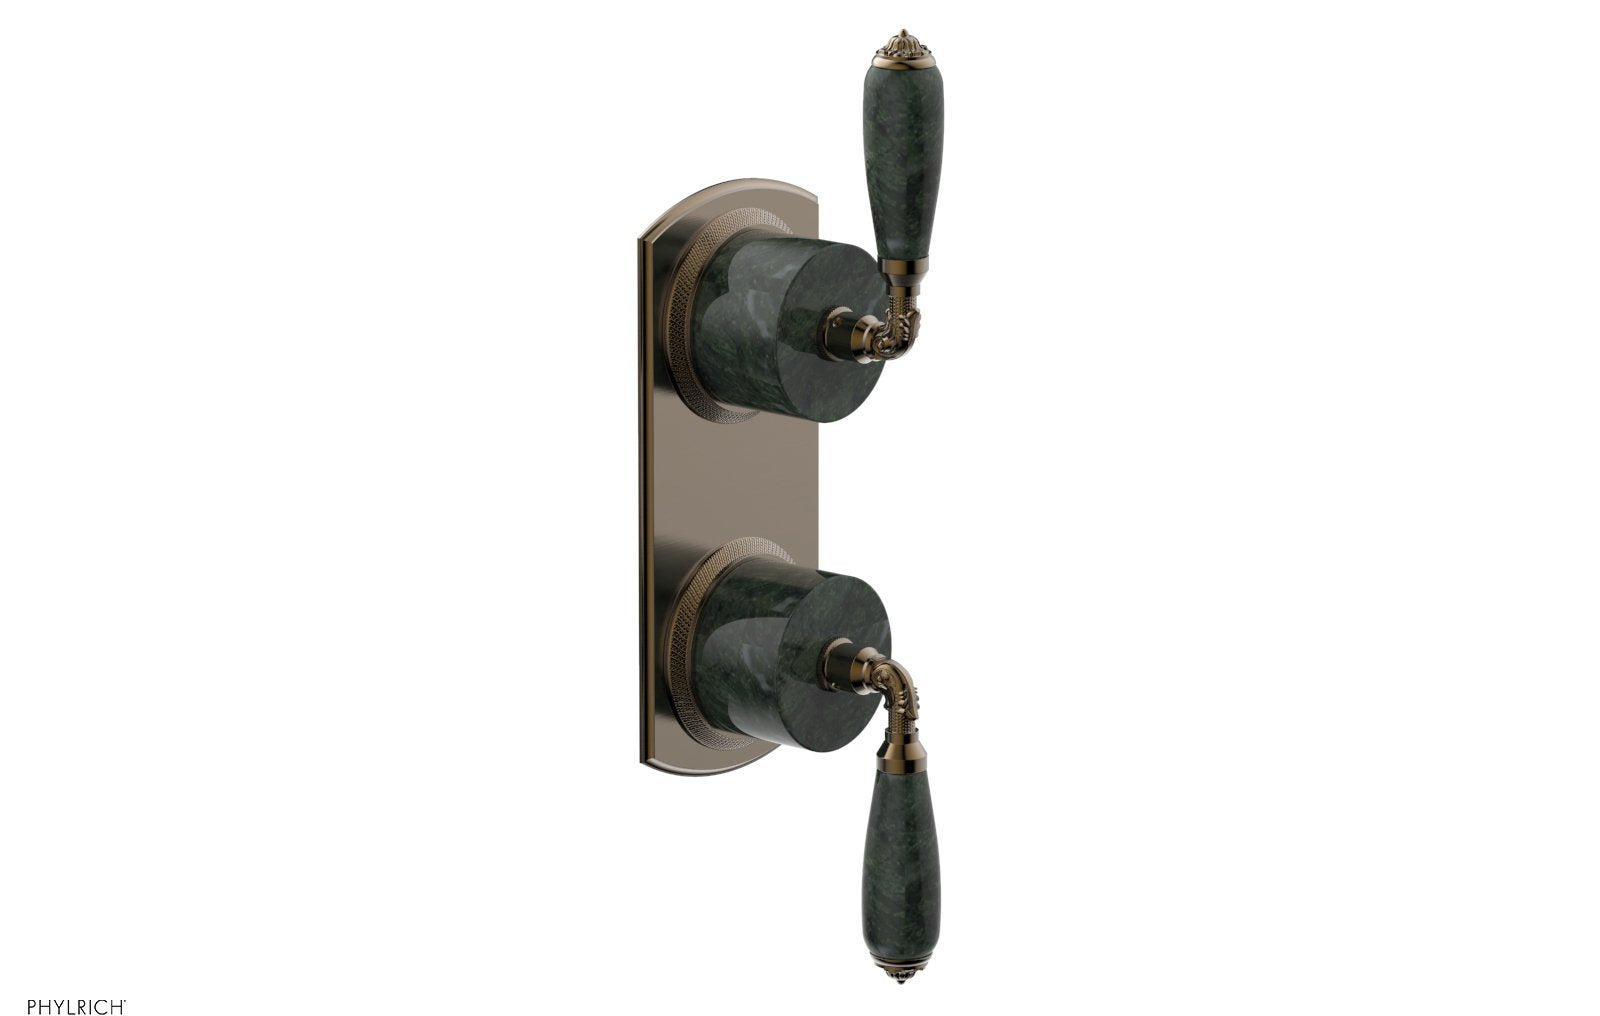 Phylrich VALENCIA Thermostatic Valve with Volume Control or Diverter, Green Marble Lever Handles